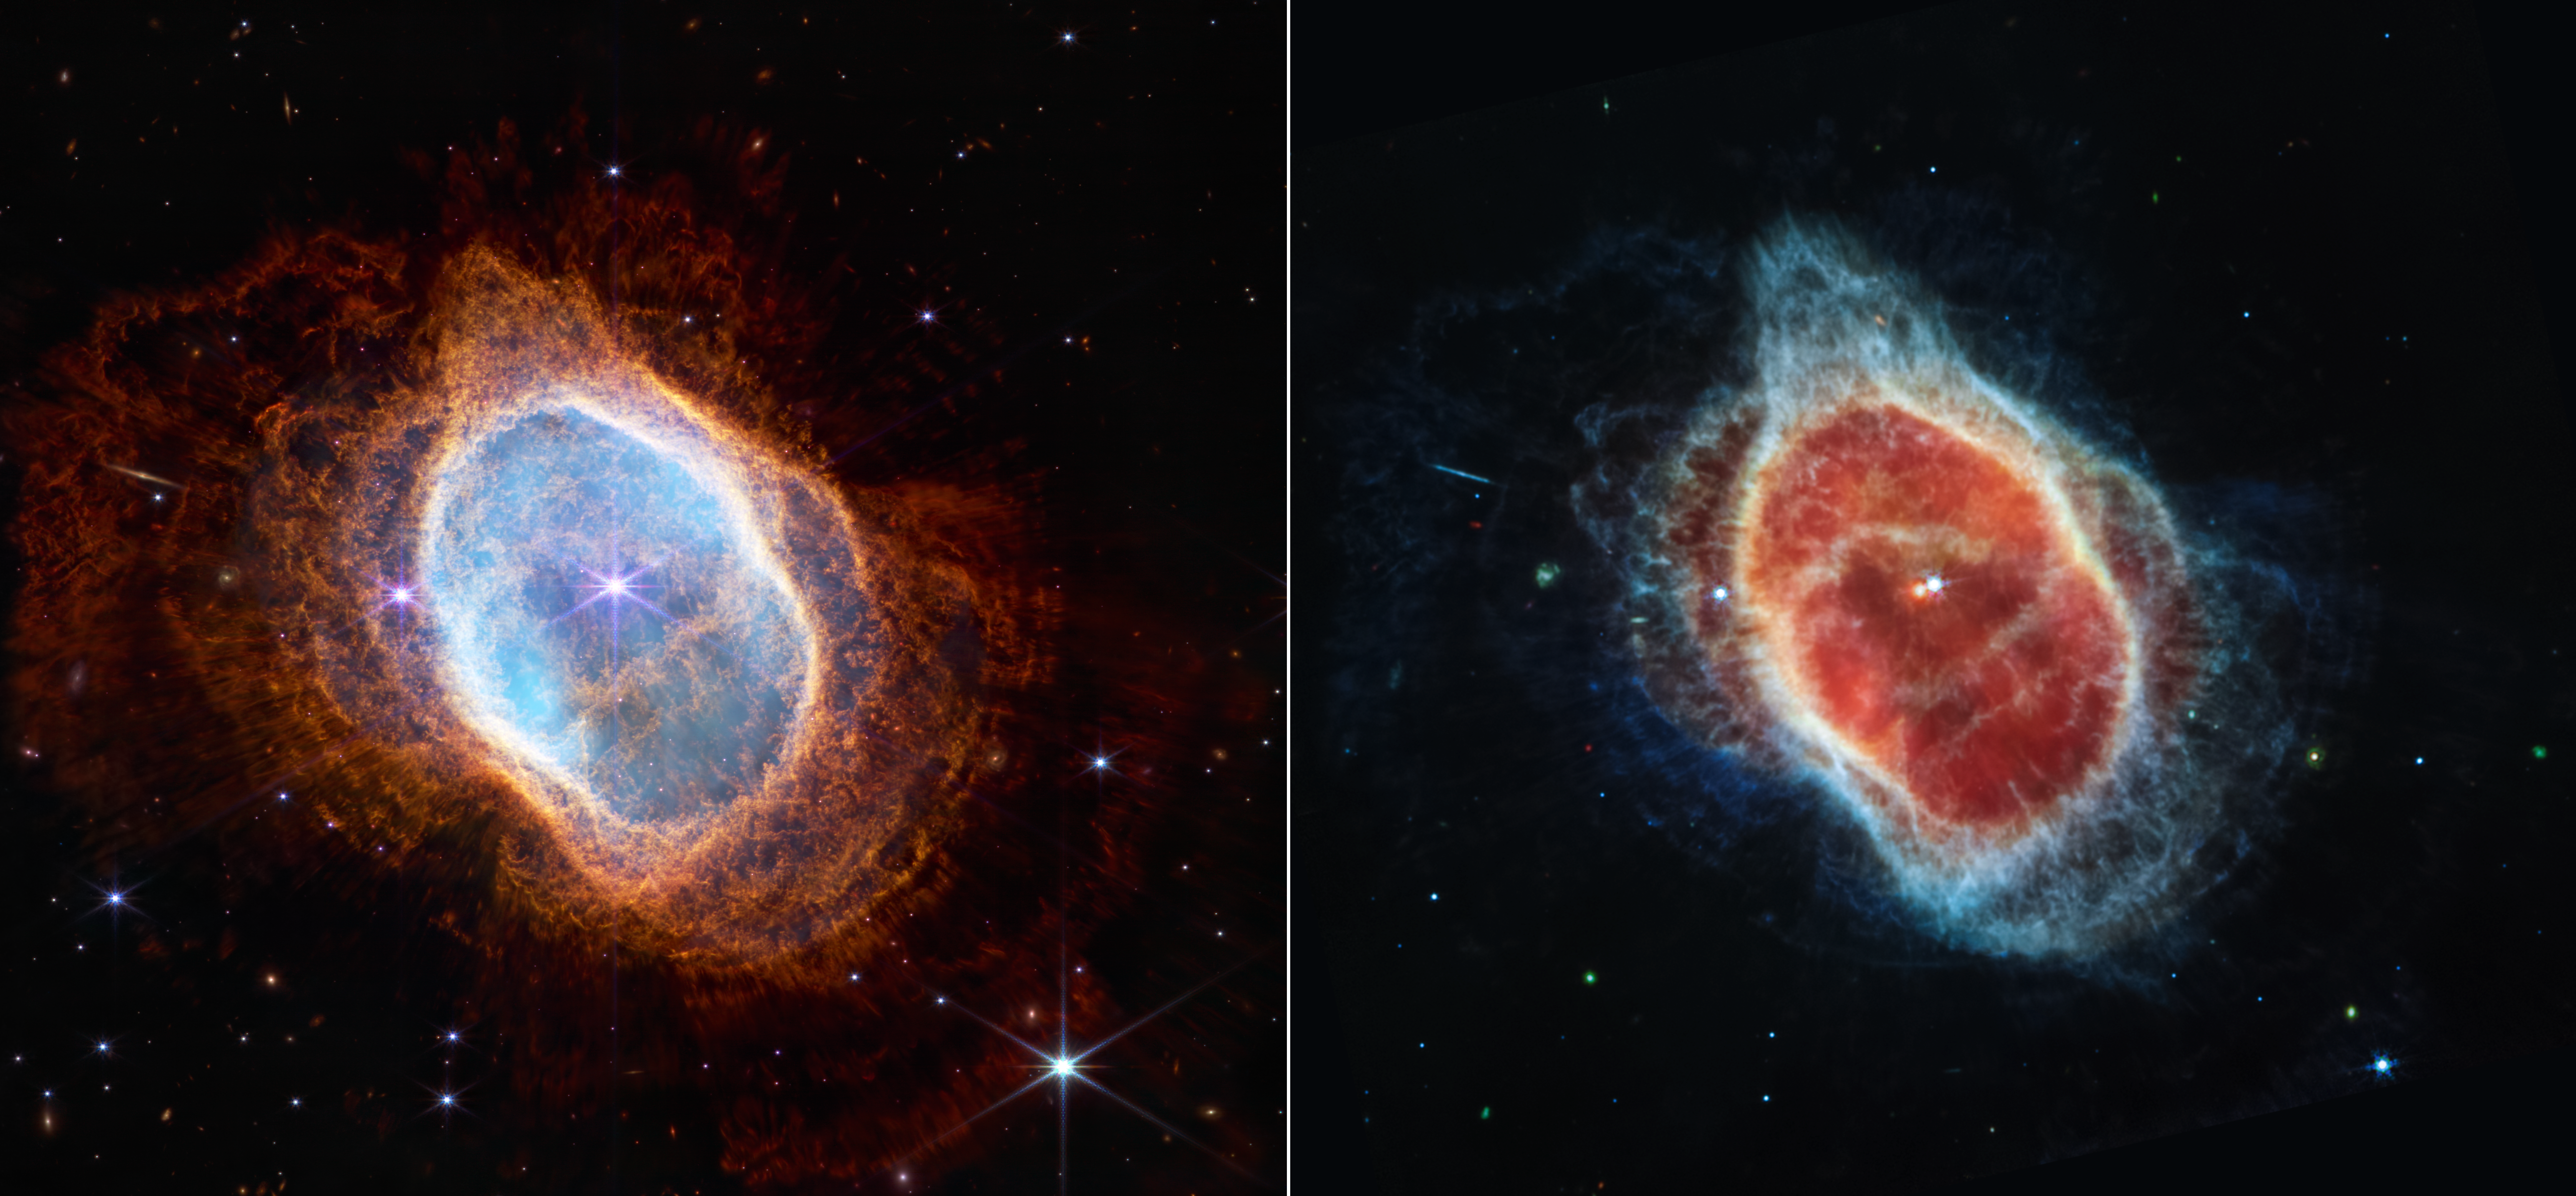 Two views of the same object, the Southern Ring Nebula, are shown side by side. Both feature black backgrounds speckled with tiny bright stars and distant galaxies. Both show the planetary nebula as a misshapen oval that is slightly angled from top left to bottom right. At left, the near-infrared image shows a bright white star with eight long diffraction spikes at the center. A large transparent teal oval surrounds the central star. Several red shells surround the teal oval, extending almost to the edges of the image. The red layers, which are wavy overall, look like they have very thin straight lines piercing through them. At right, the mid-infrared image shows two stars at the center very close to one another. The one at left is red, the one at right is light blue. The blue star has tiny diffraction spikes around it. A large translucent red oval surrounds the central stars. From the red oval, shells extend in a mix of colors.